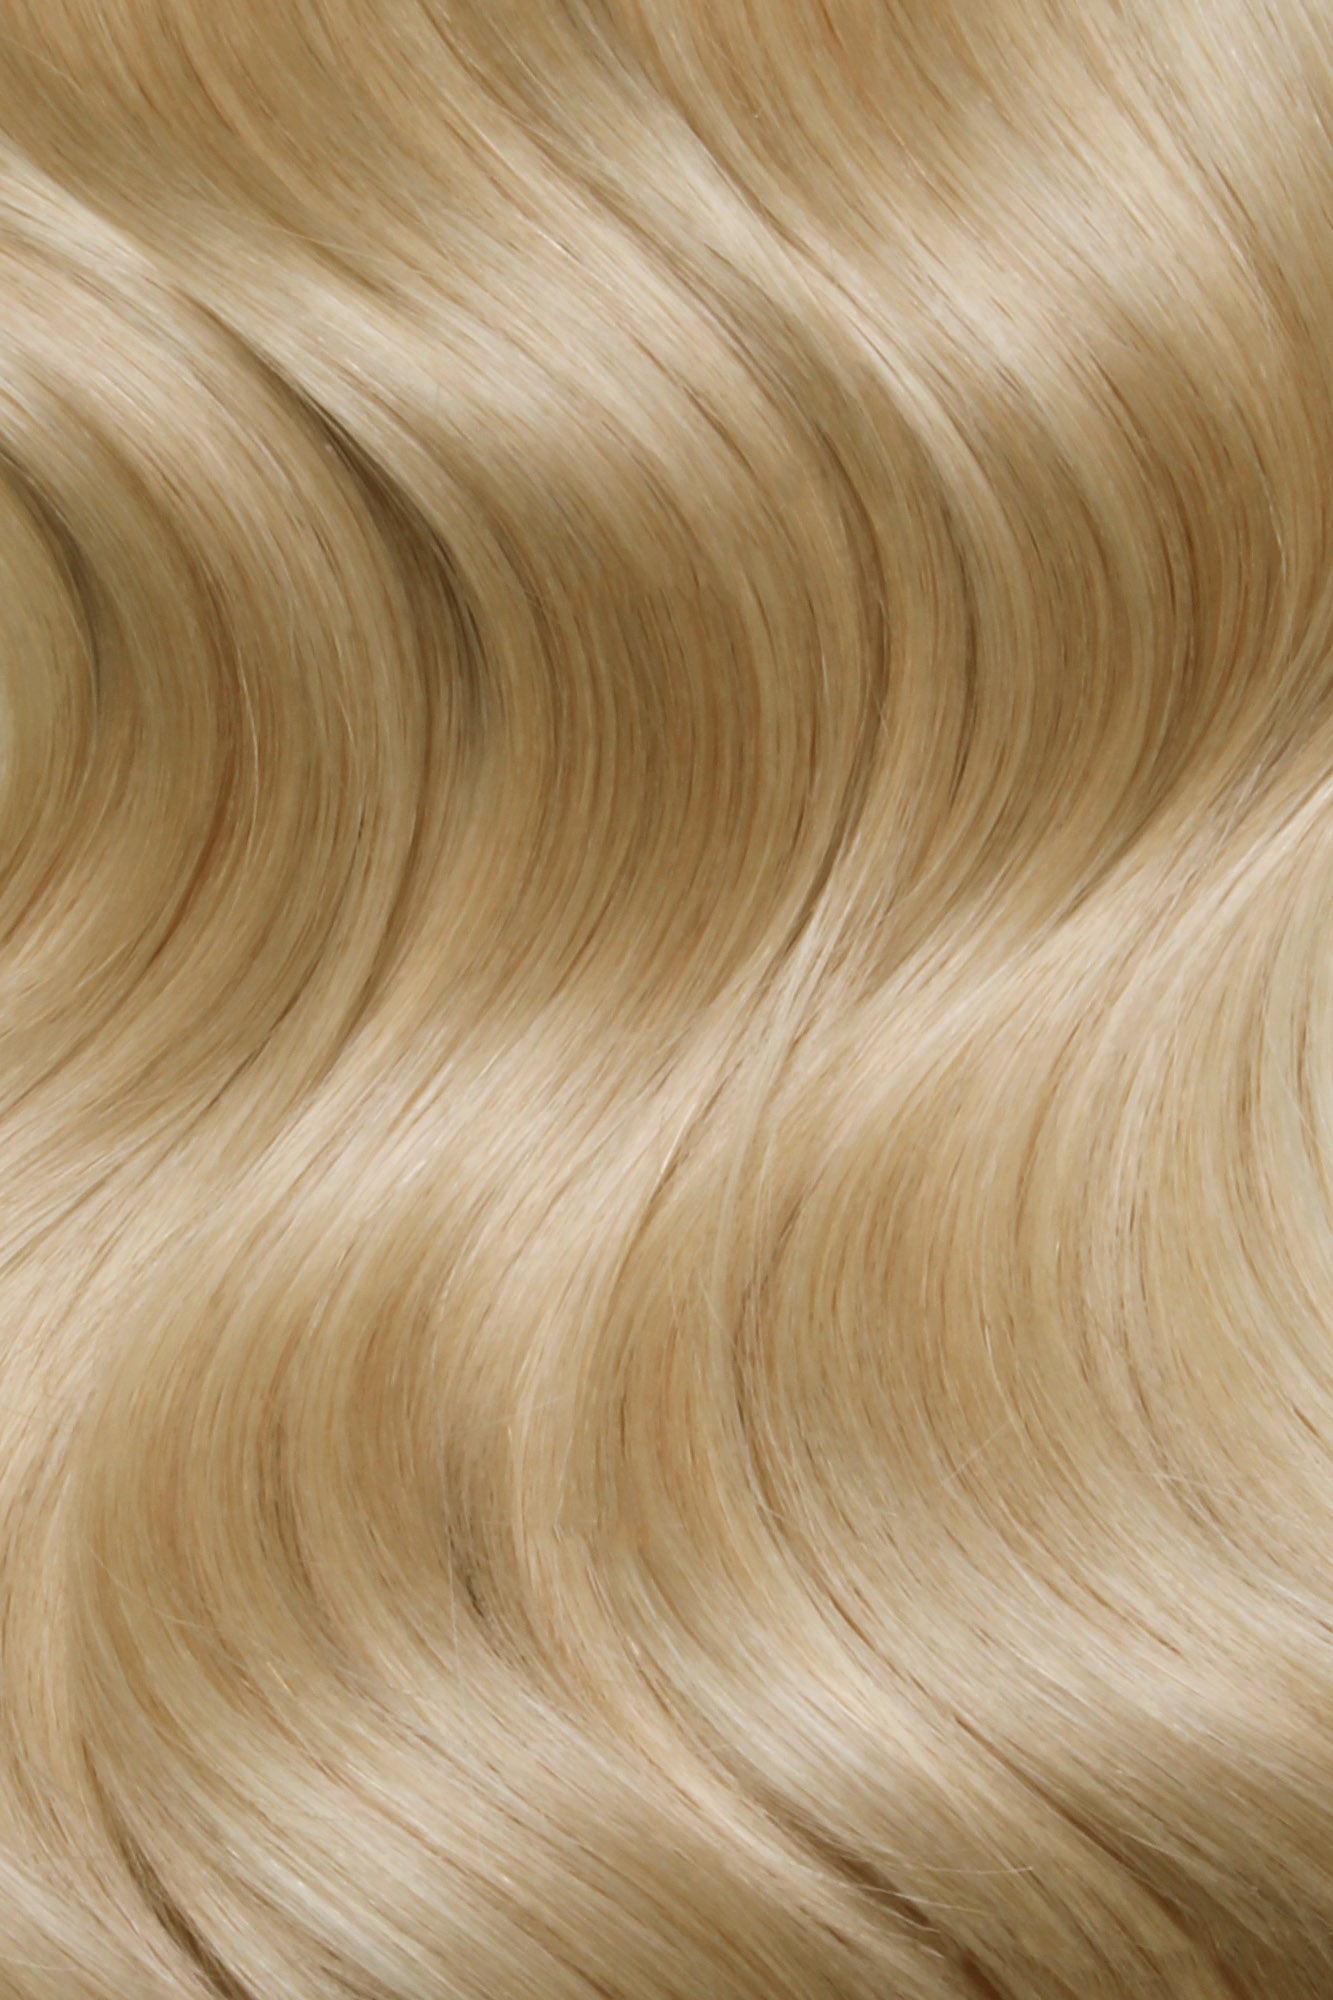 SEAMLESS® Flat Weft 20 Inches - SWAY Hair Extensions Natural-Ash-Blonde-20 Natural SEAMLESS® Flat Weft 20 Inches extensions. Thin, flexible, and discreet. 100% Double Drawn Remy Human Hair. Versatile and reusable